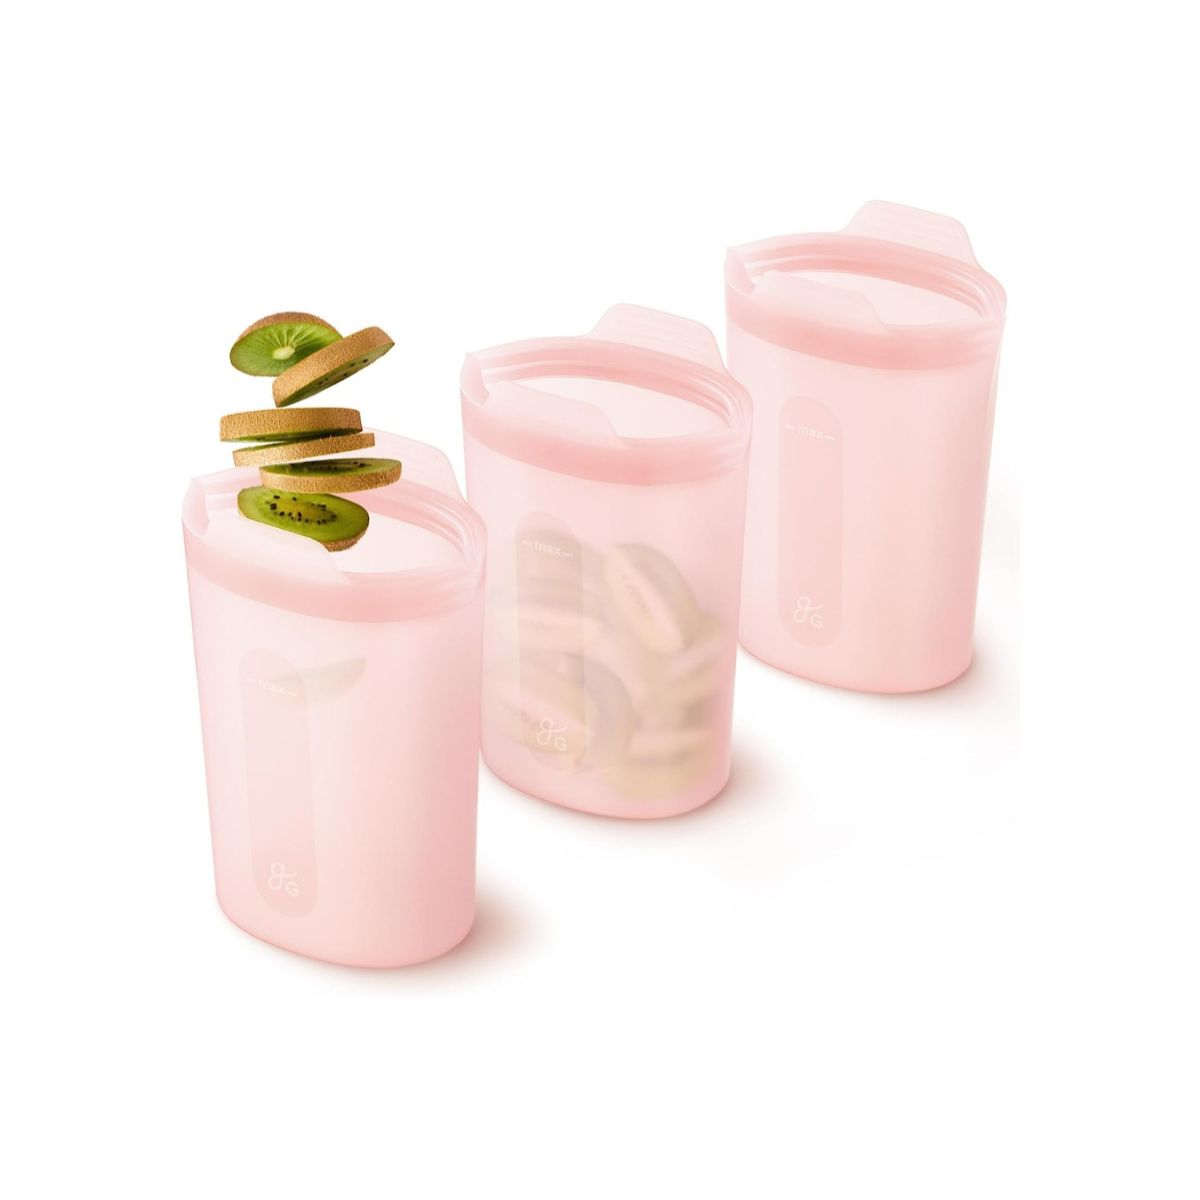 Three pink silicone food storage containers for lunches